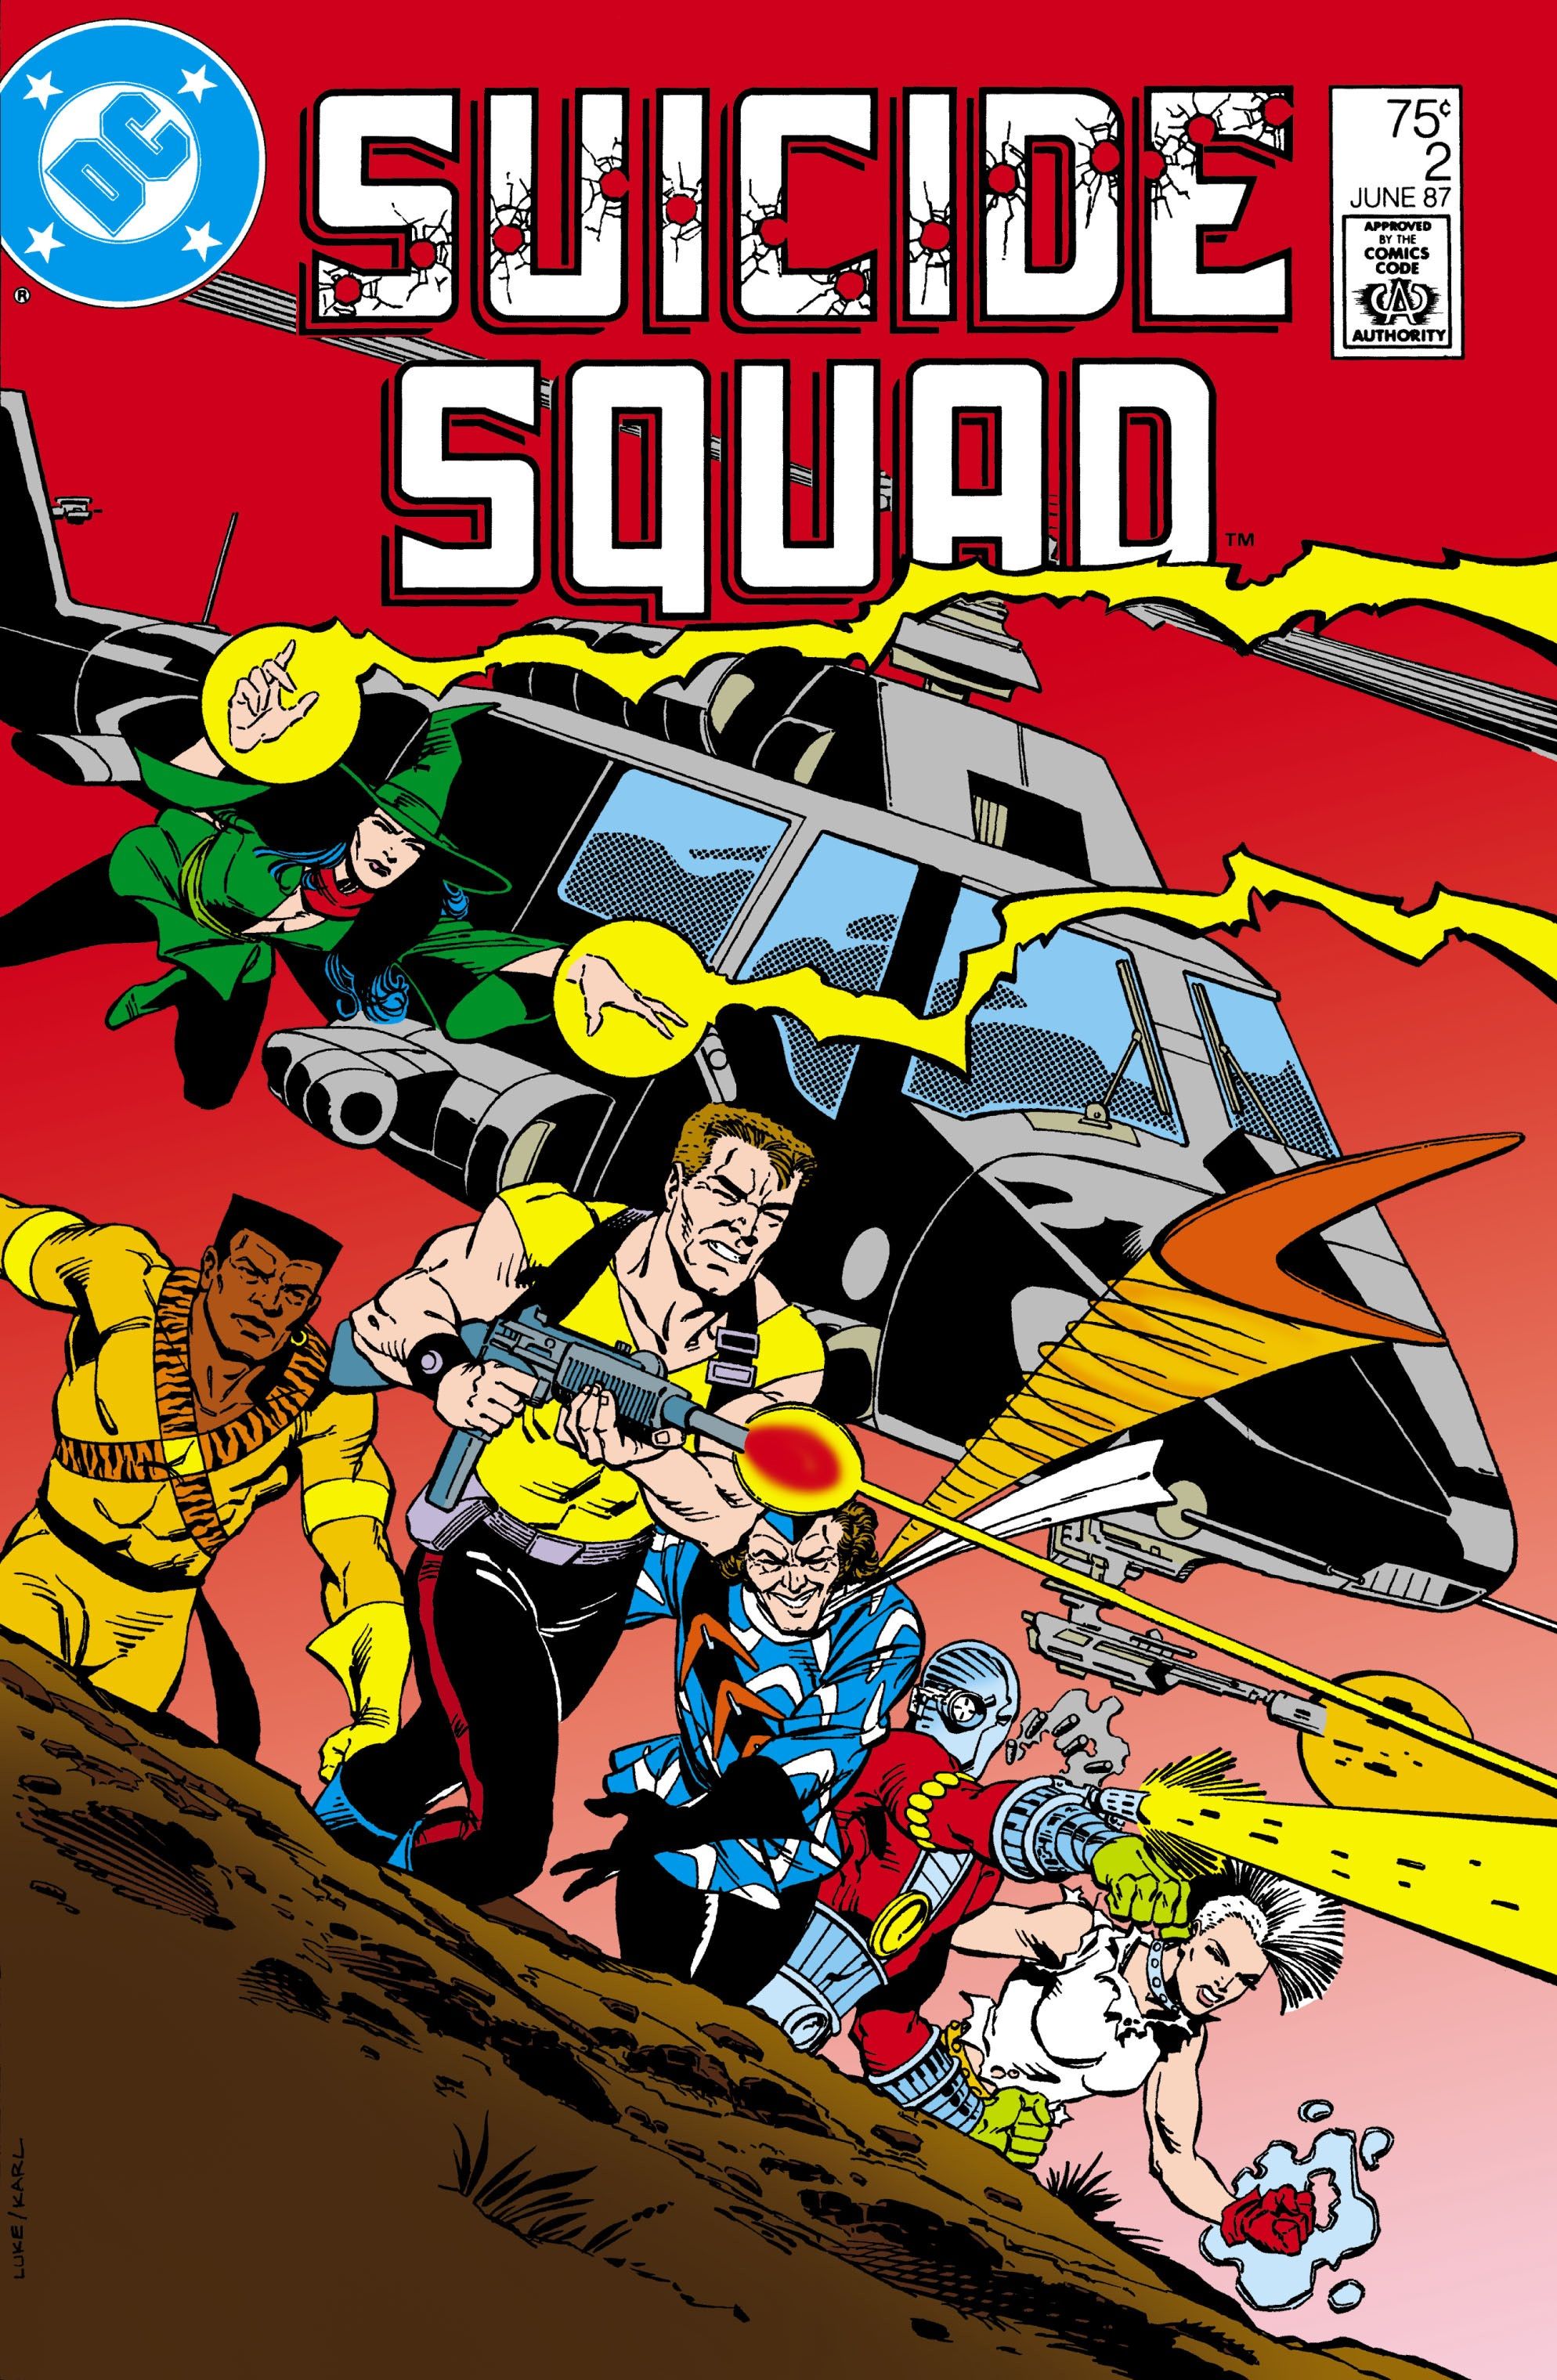 And then later, Rick Flag Jr. led the superpowered Suicide Squad